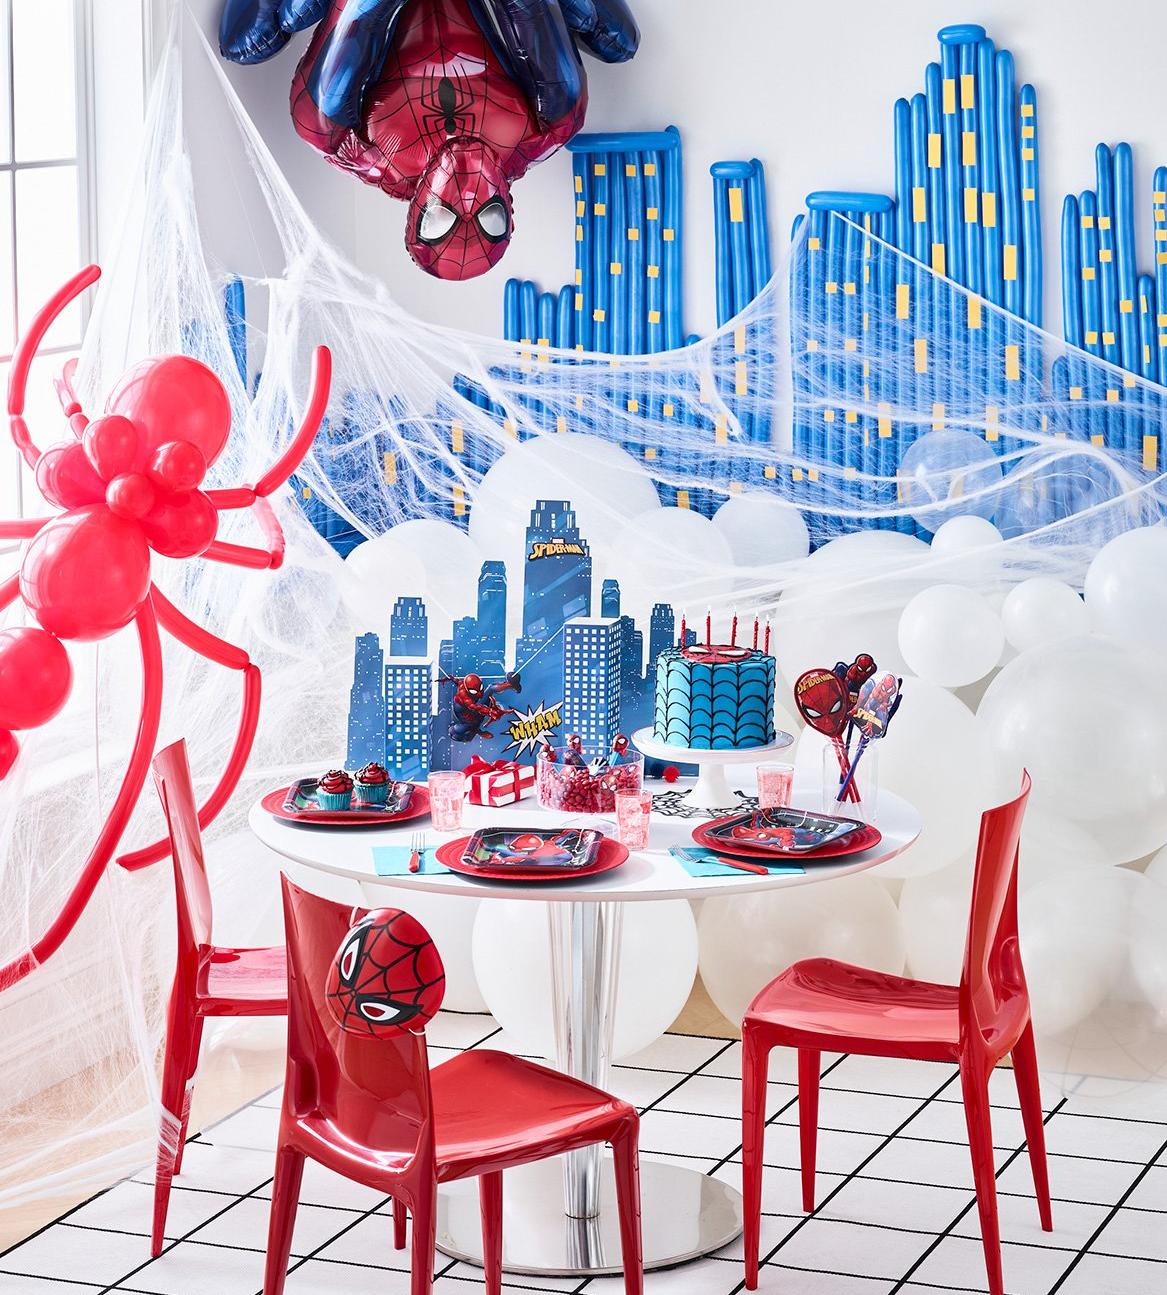 Swing into Action with Spiderman Theme Birthday Party Decorations